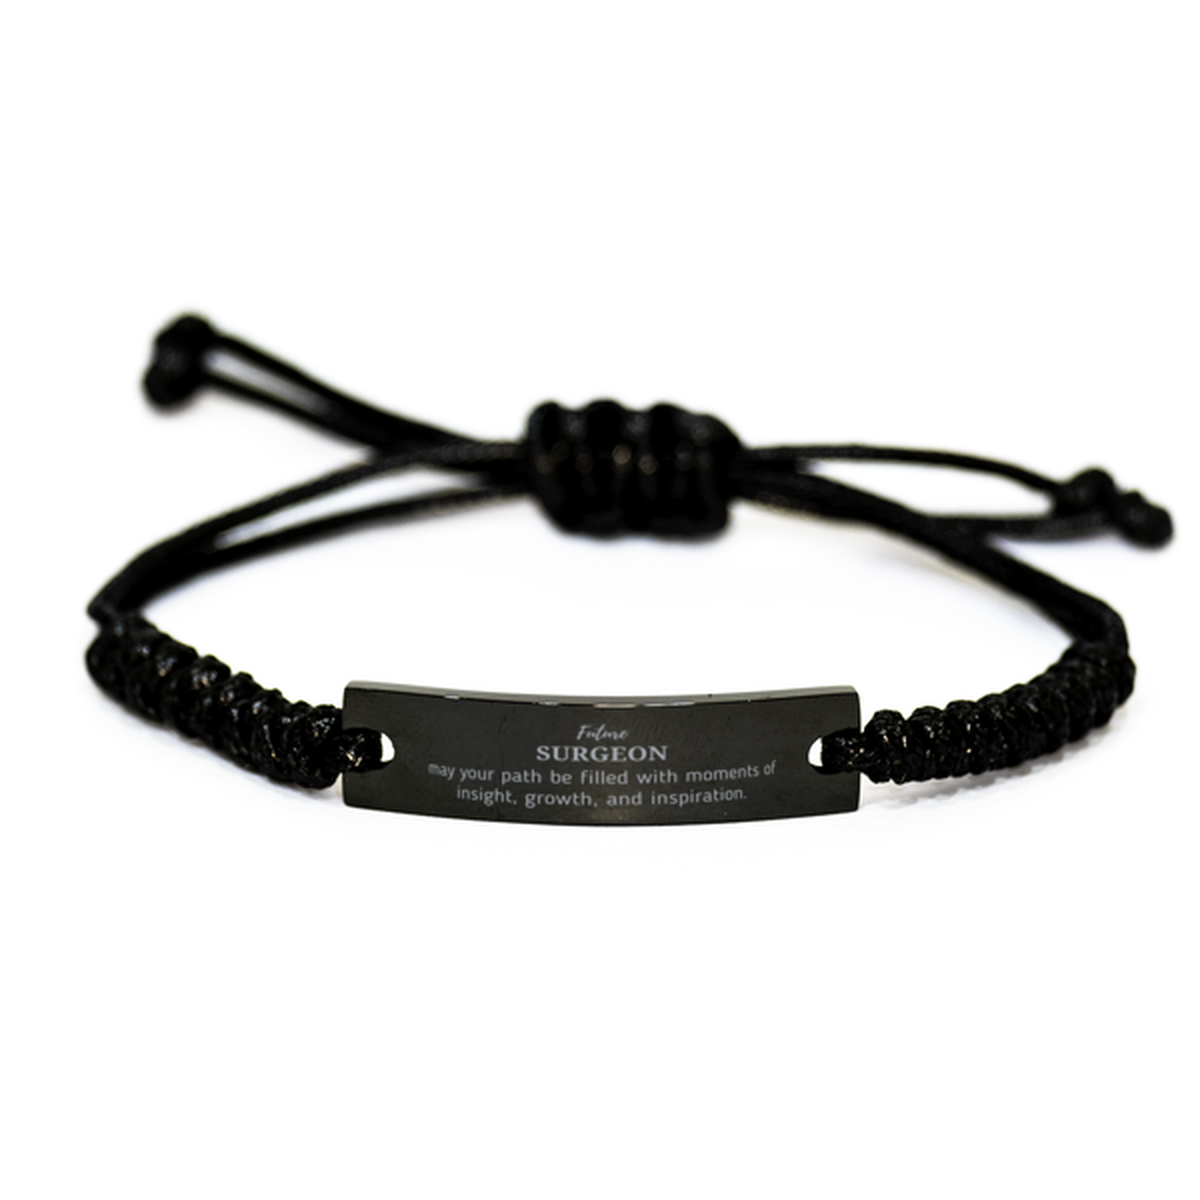 Future Surgeon Gifts, May your path be filled with moments of insight, Graduation Gifts for New Surgeon, Christmas Unique Black Rope Bracelet For Men, Women, Friends